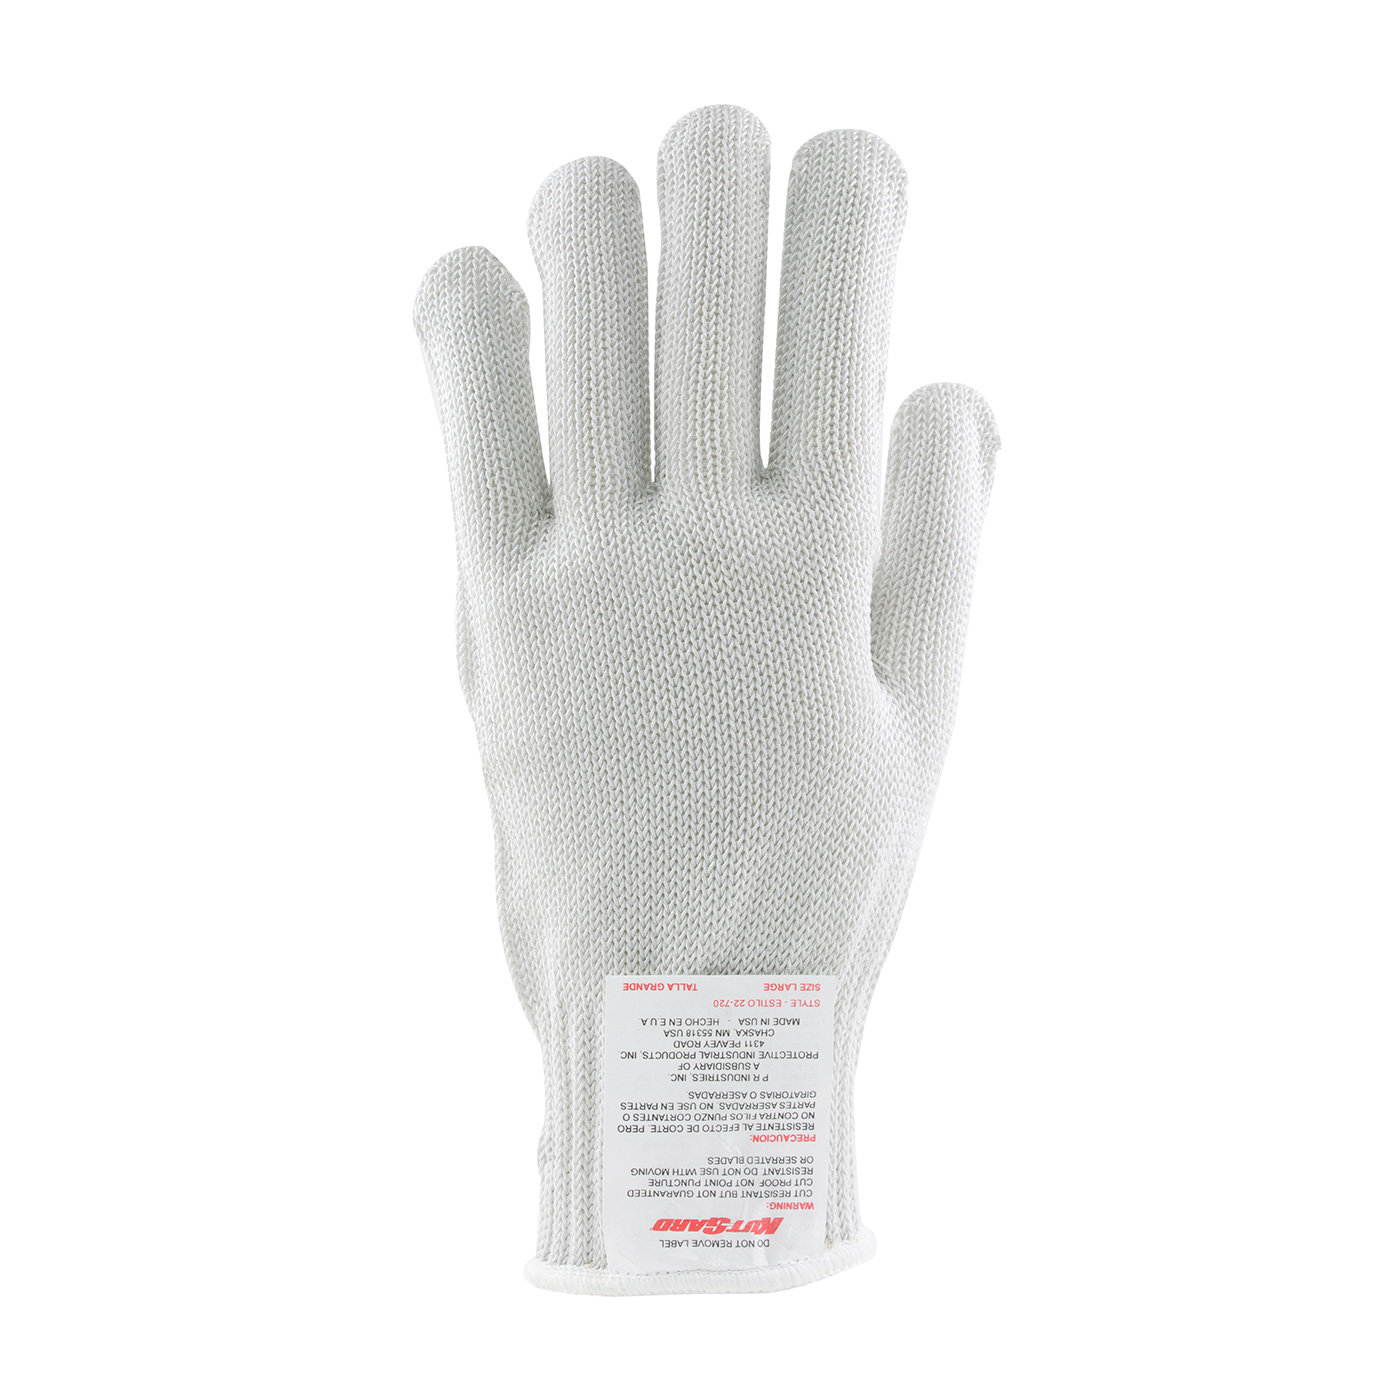 22-720 PIP® Claw Cover® Seamless Knit PolyKor® Blended Antimicrobial Glove - Medium Weight